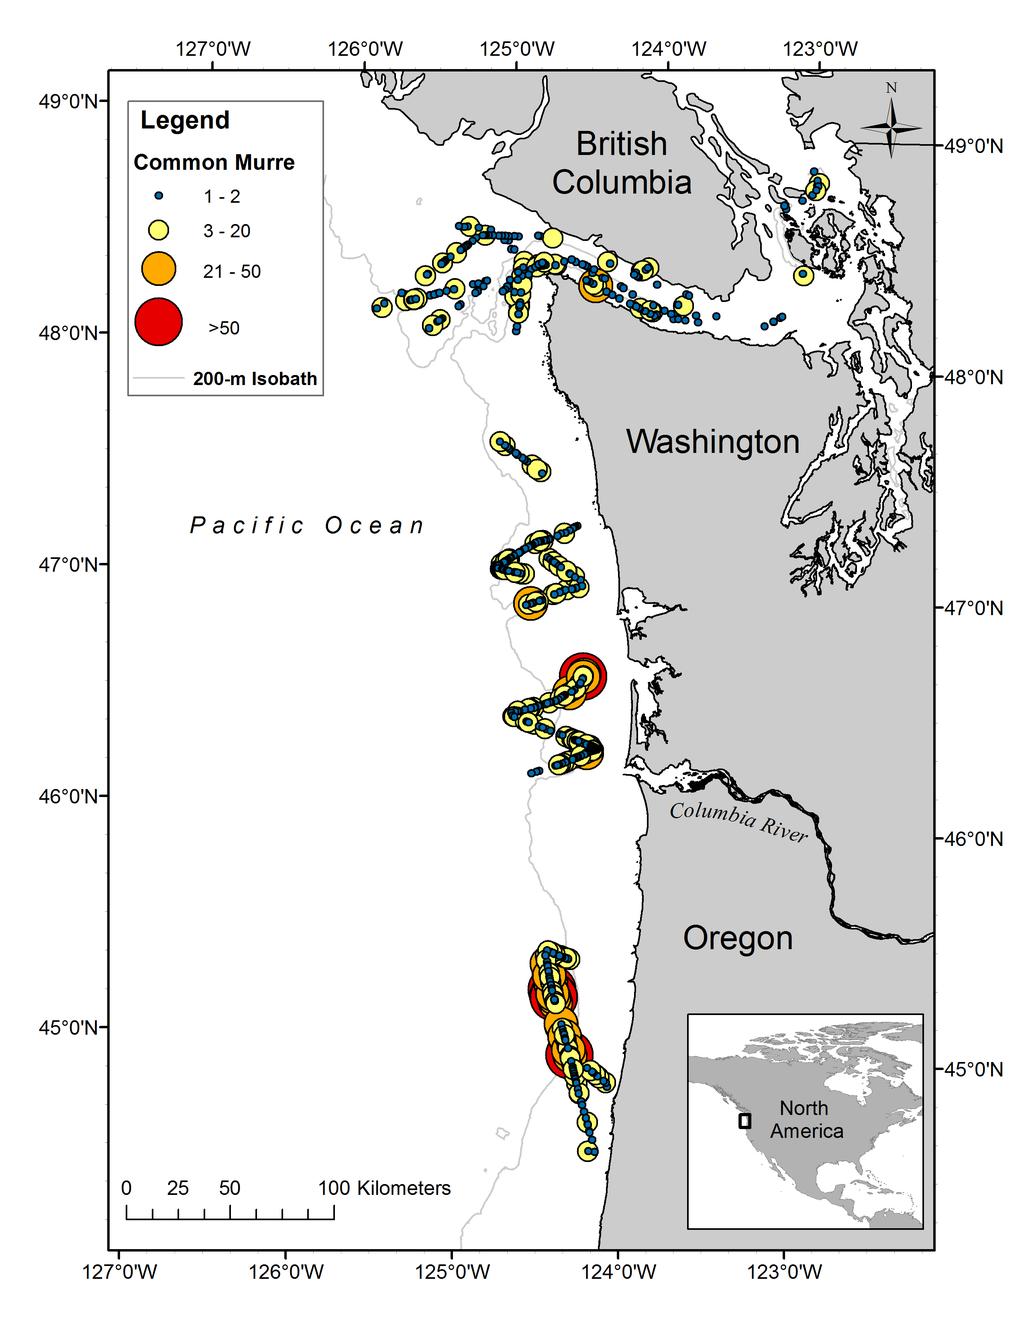 Figure 1. Distribution of common murres, 16 February 06 March 2012.